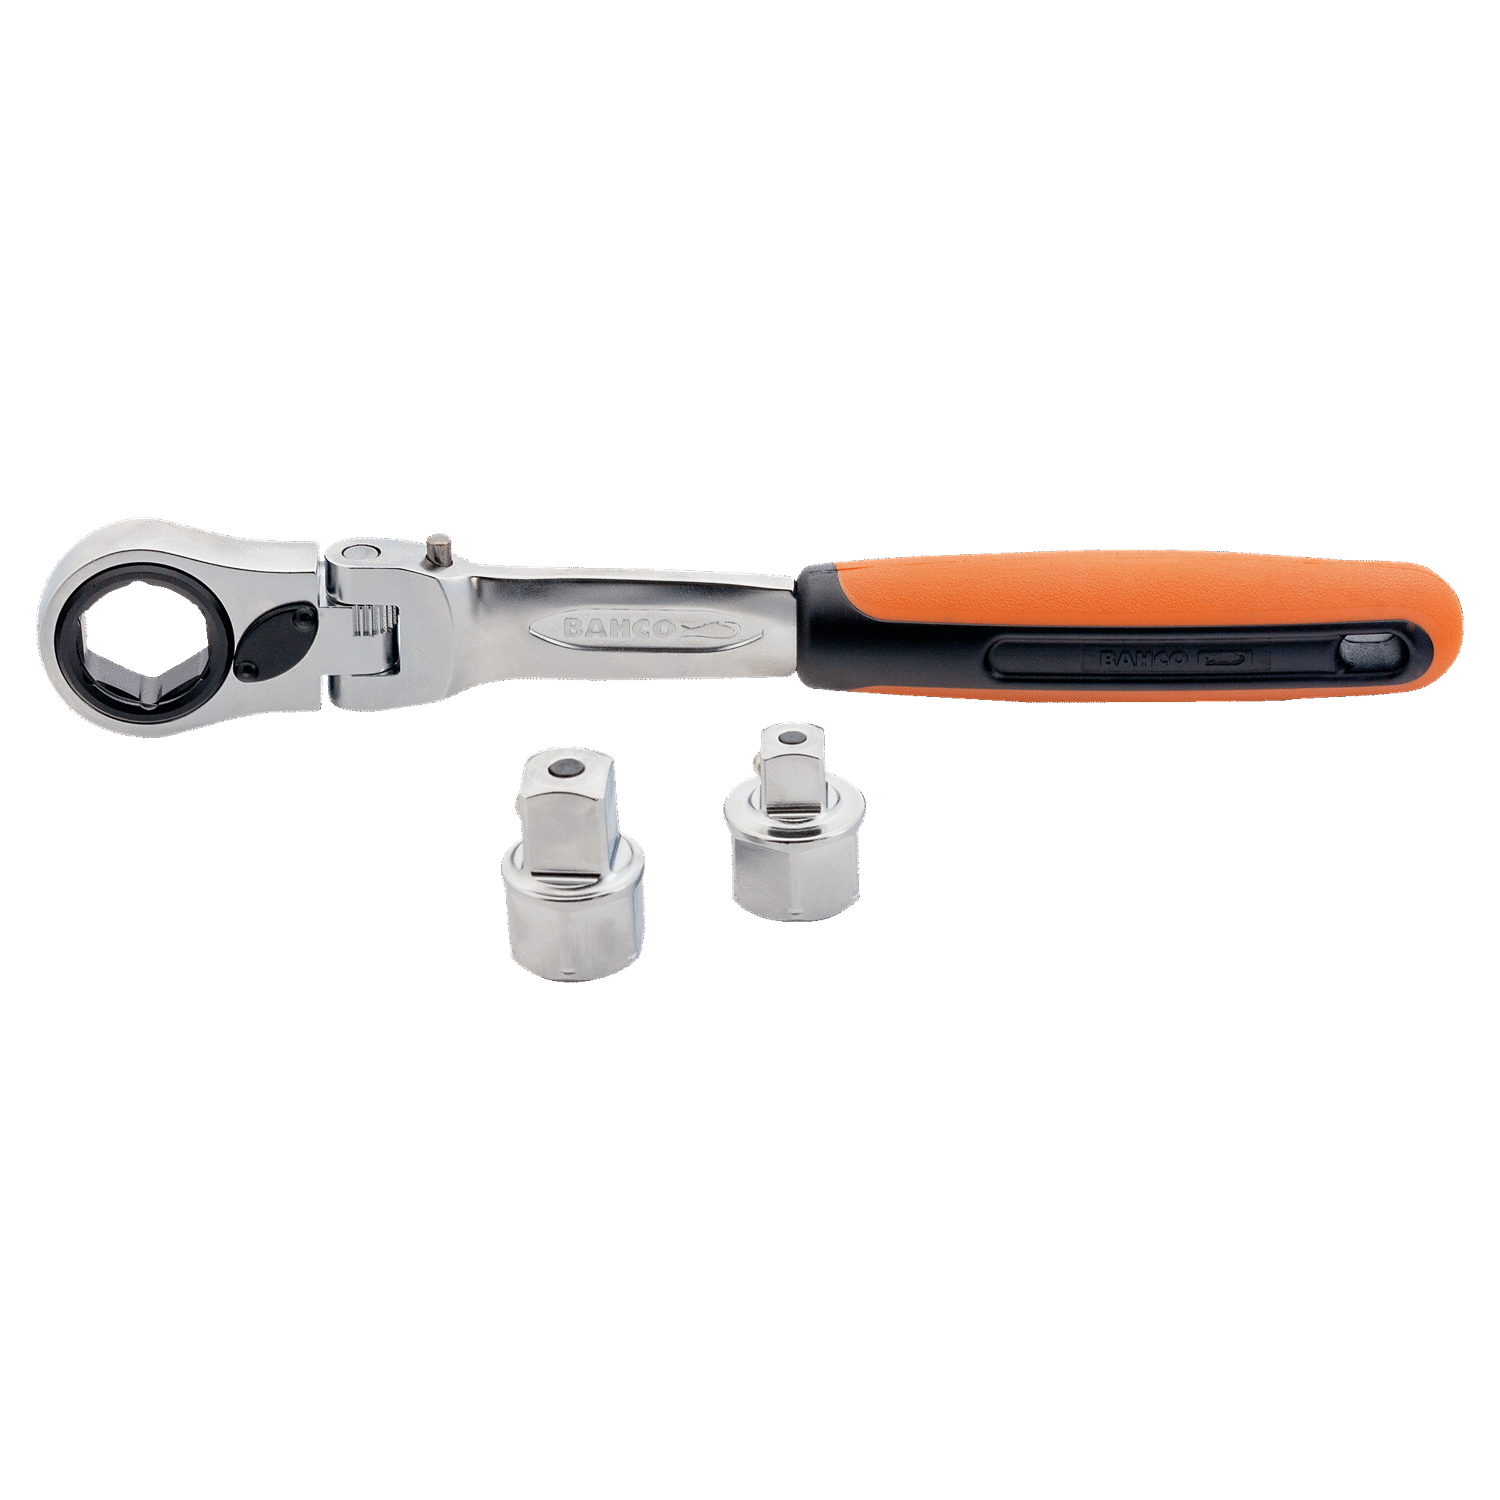 BAHCO S140T-R Pass- Through Ratchet Set Hex To Drive Adaptors - Premium Pass- Through Ratchet from BAHCO - Shop now at Yew Aik.